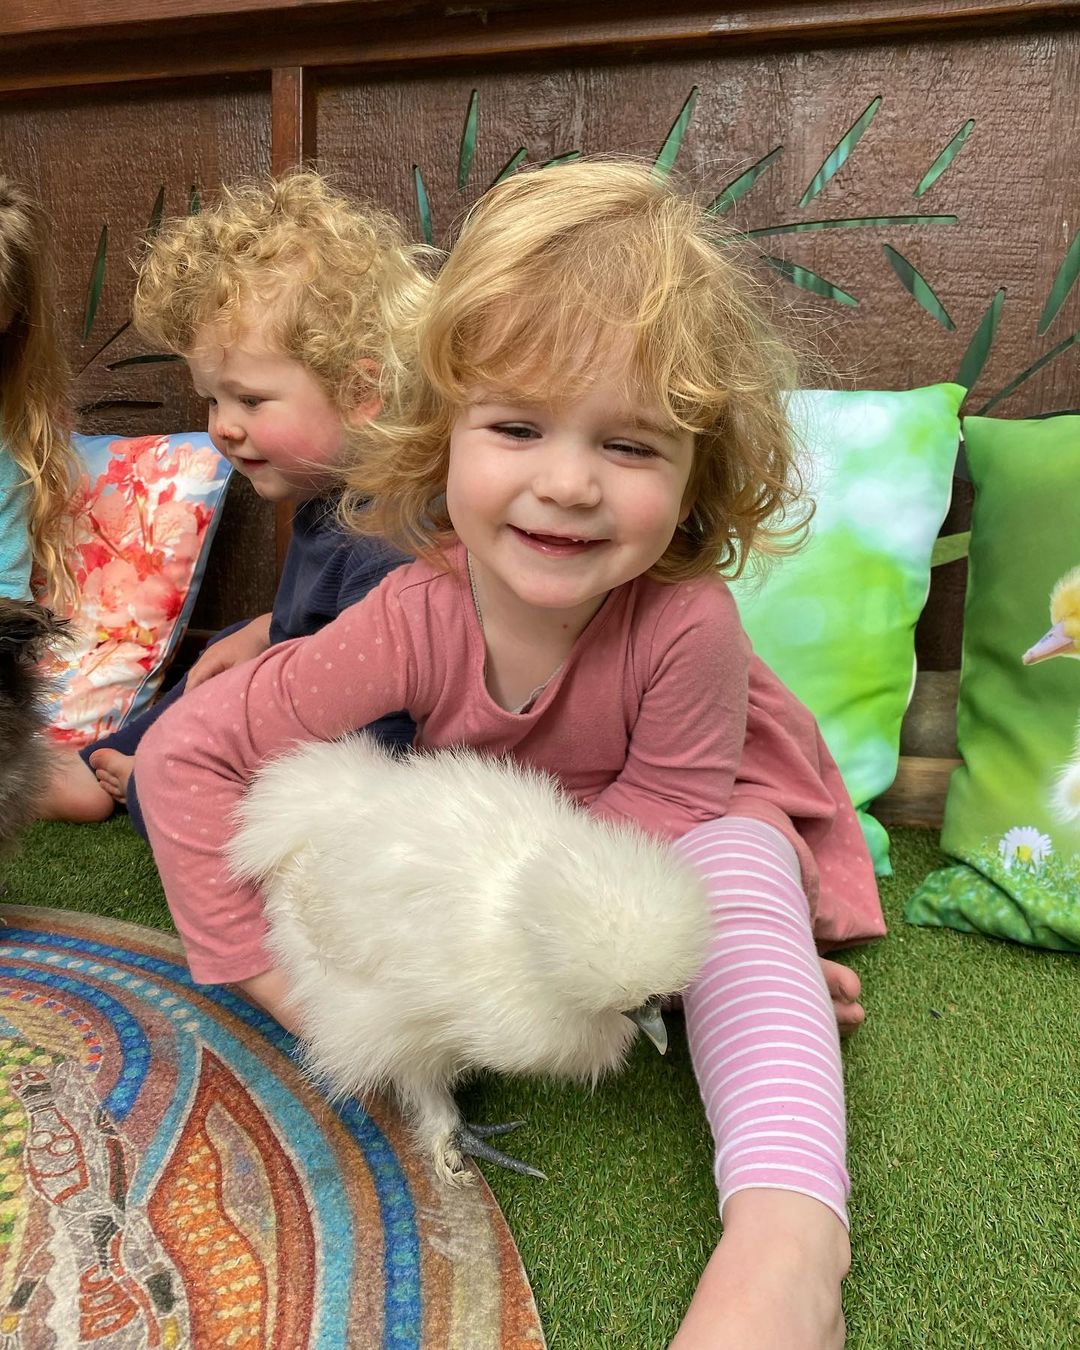 We had some special visitors today at A Head Start Currumbin! Miss Kandice’s chickens 🐥🐥Cinnamon and Snow came in for a play!
The children were very excited to give them lots of cuddles and pats 🥰 

#chickens #babychicks #silkiechicken #cinnamon #snow #earlylearning #nationalqualitystandards #nationalqualityframework #aheadstartcentres
